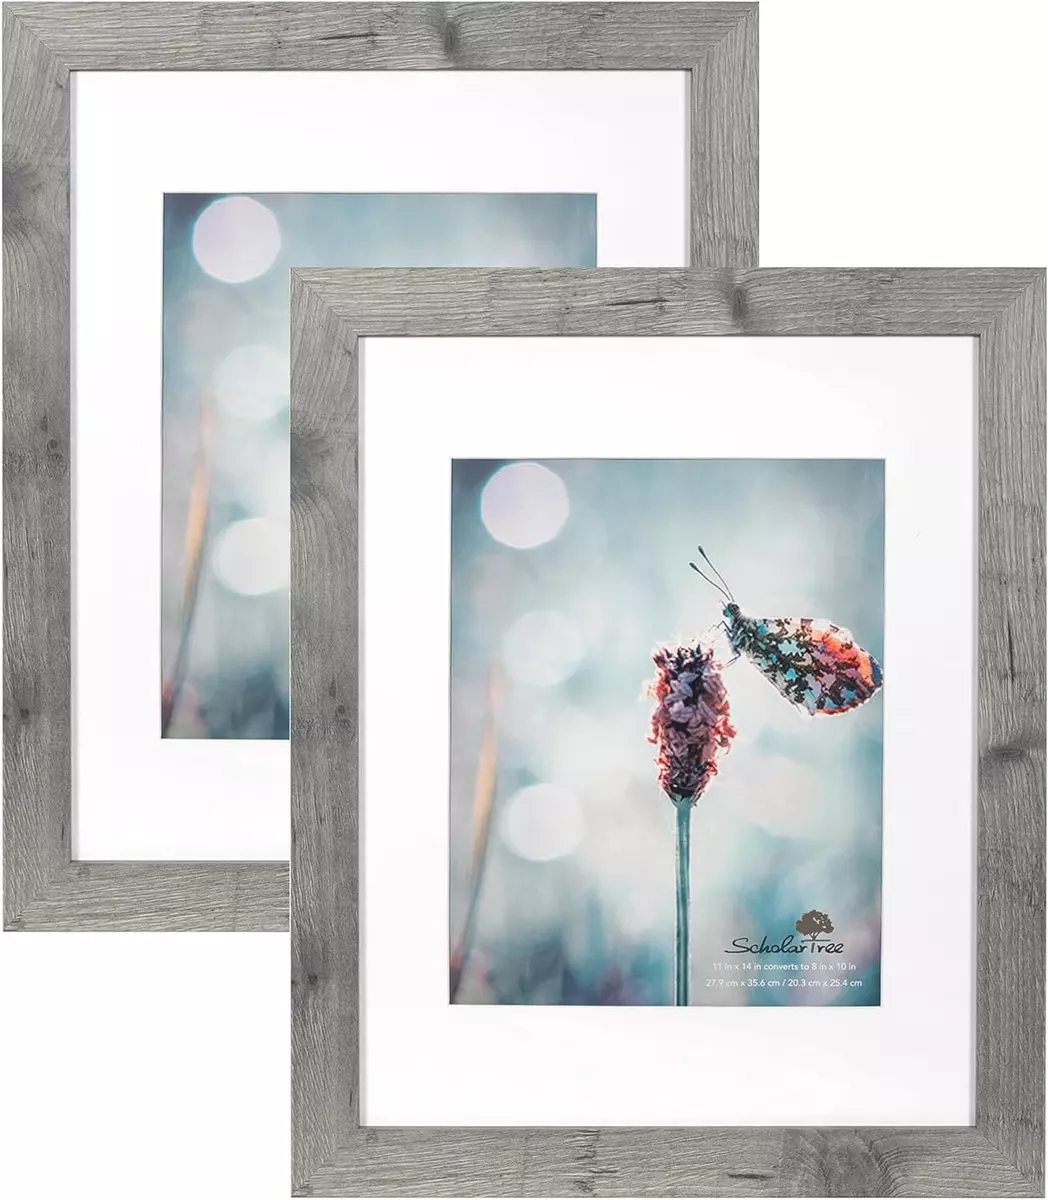 Portrait Frame Beautiful Mirror Border- 16x20 or matted For 11x14